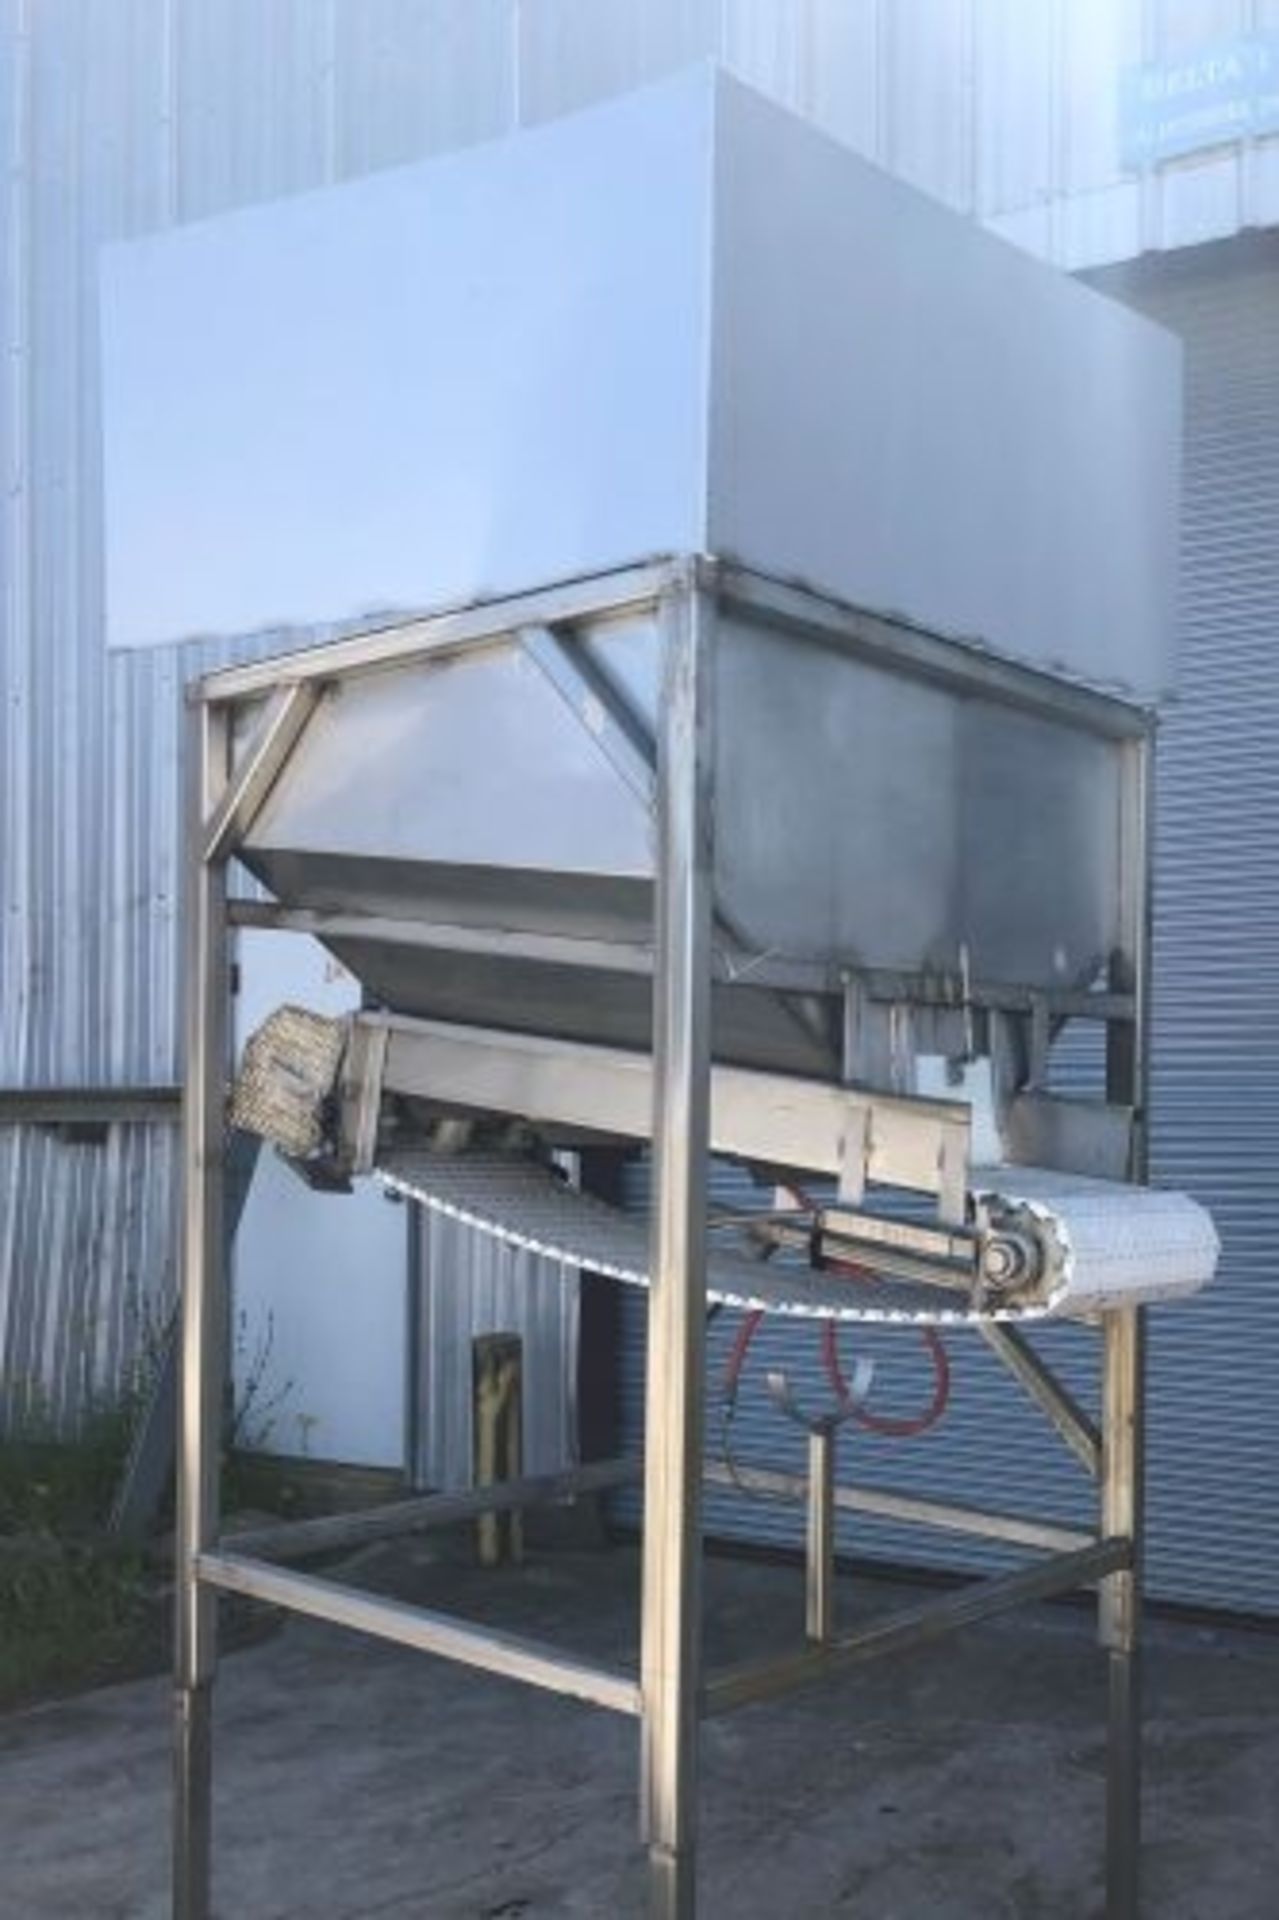 18" wide x 72" long stainless steel conveyor and hopper